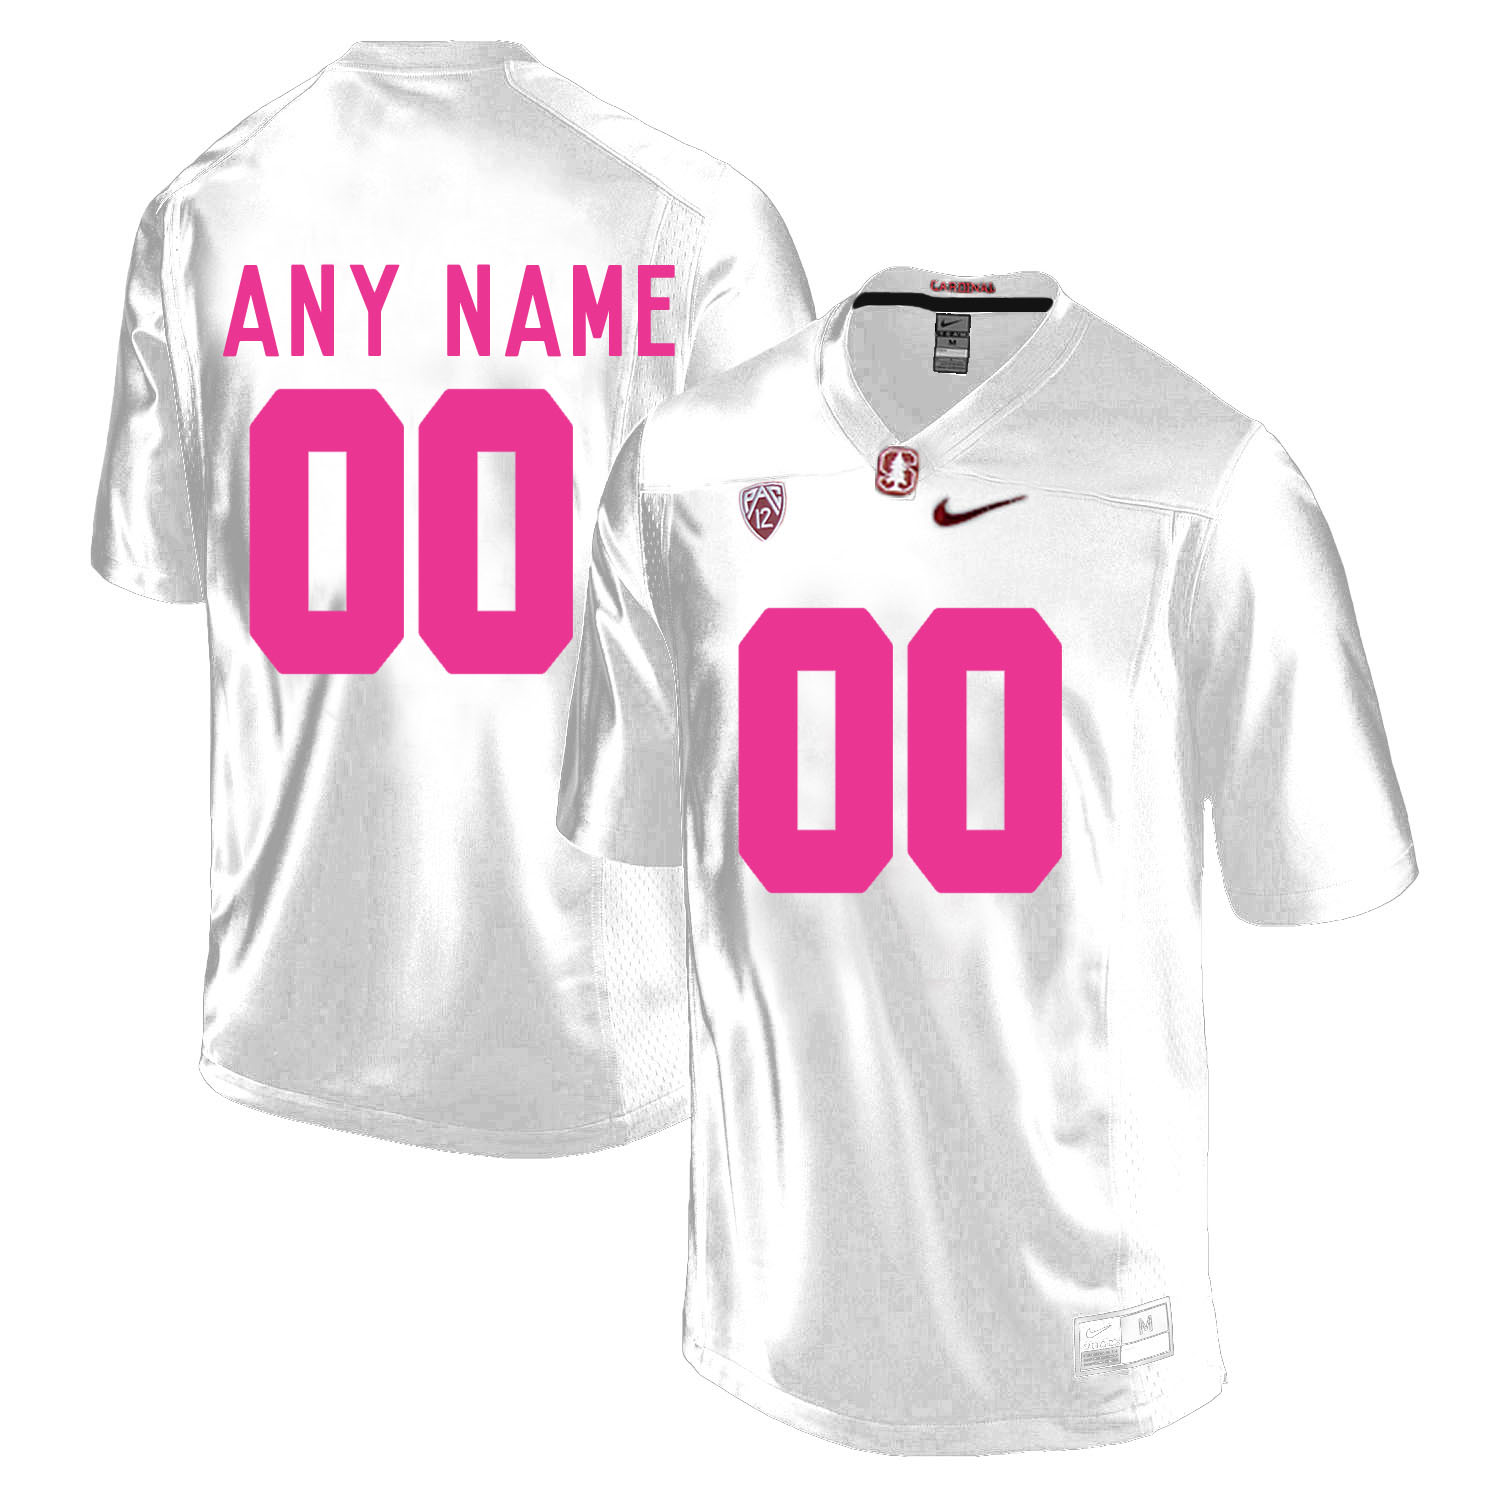 Stanford Cardinal White Men's Customized 2018 Breast Cancer Awareness College Football Jersey